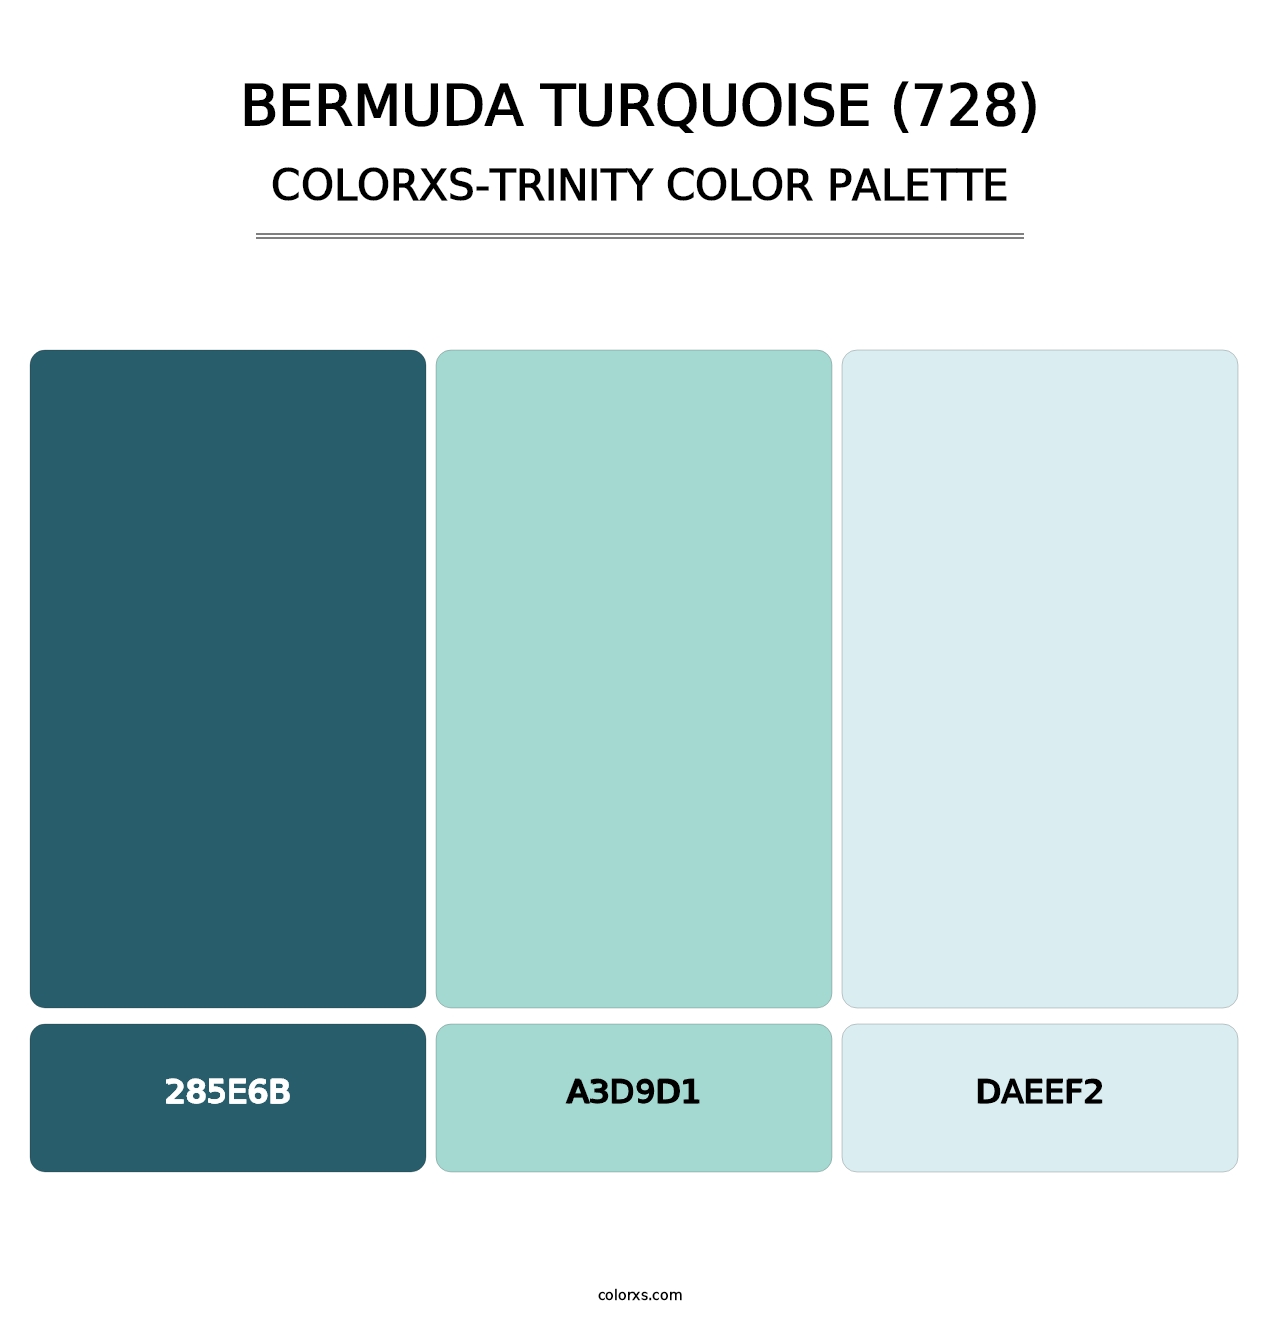 Bermuda Turquoise (728) - Colorxs Trinity Palette